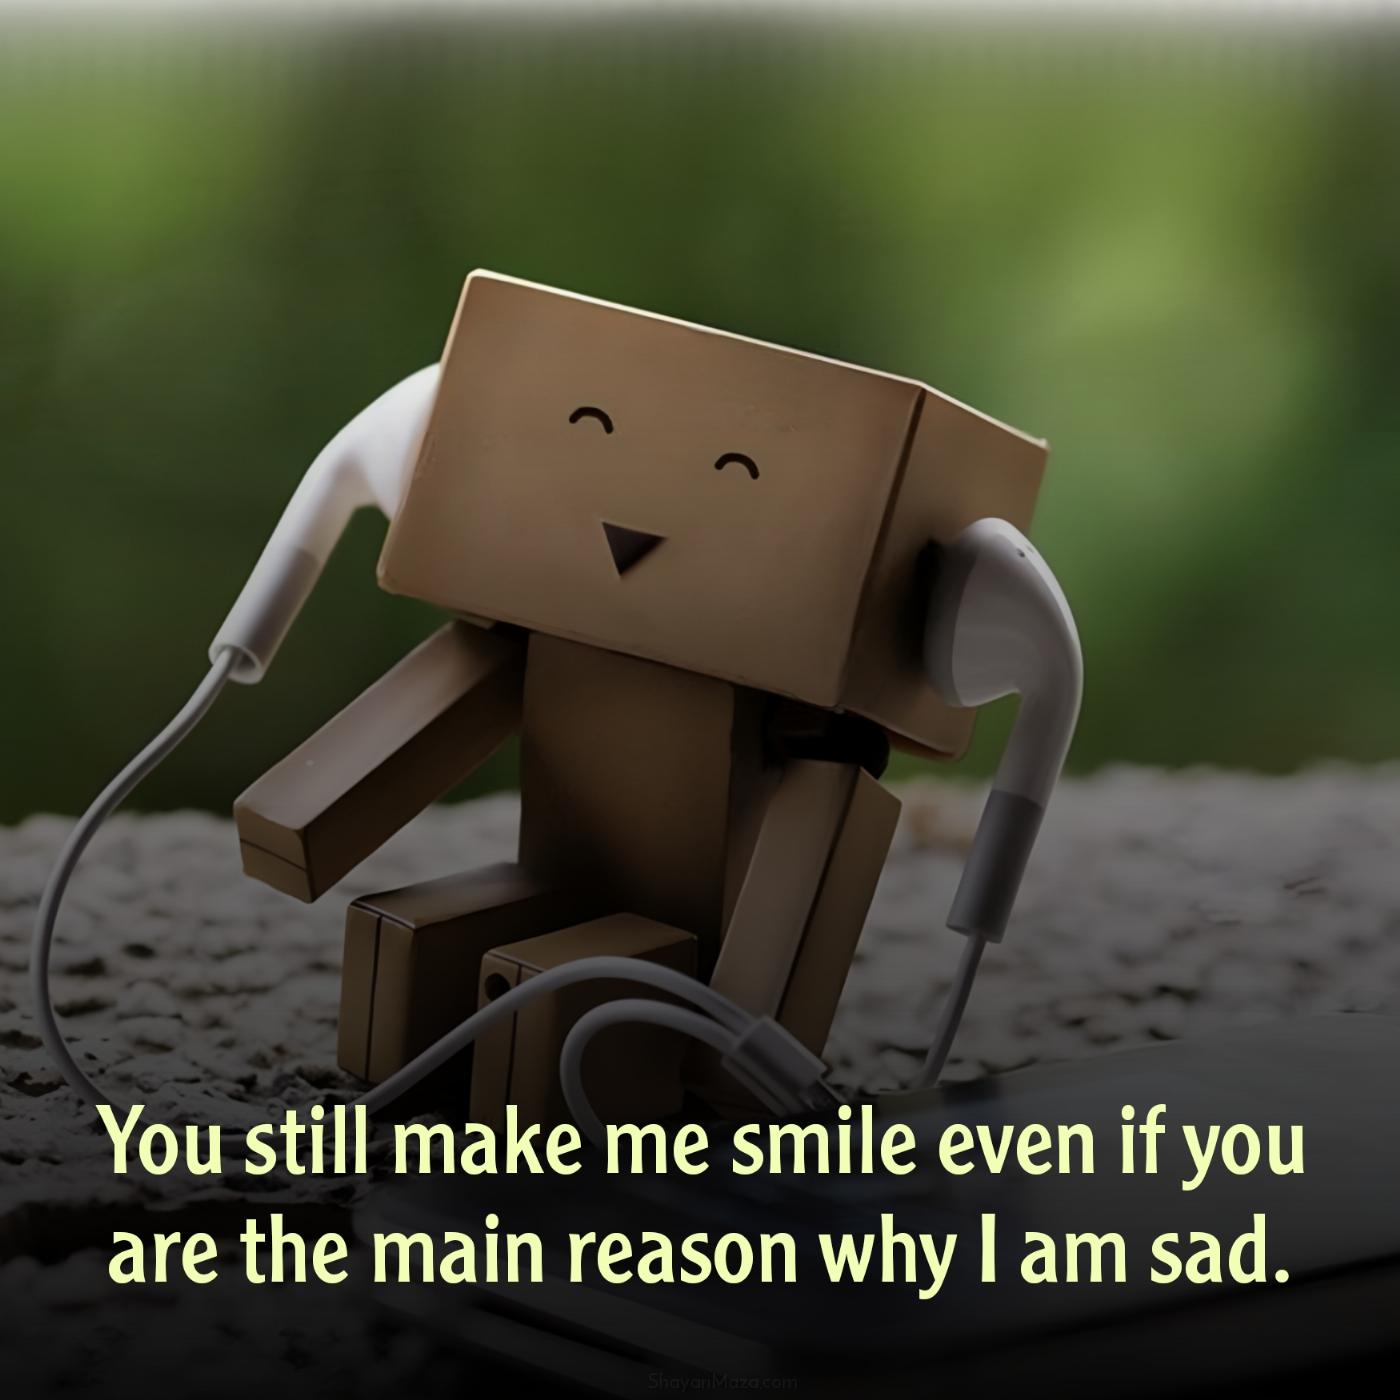 You still make me smile even if you are the main reason